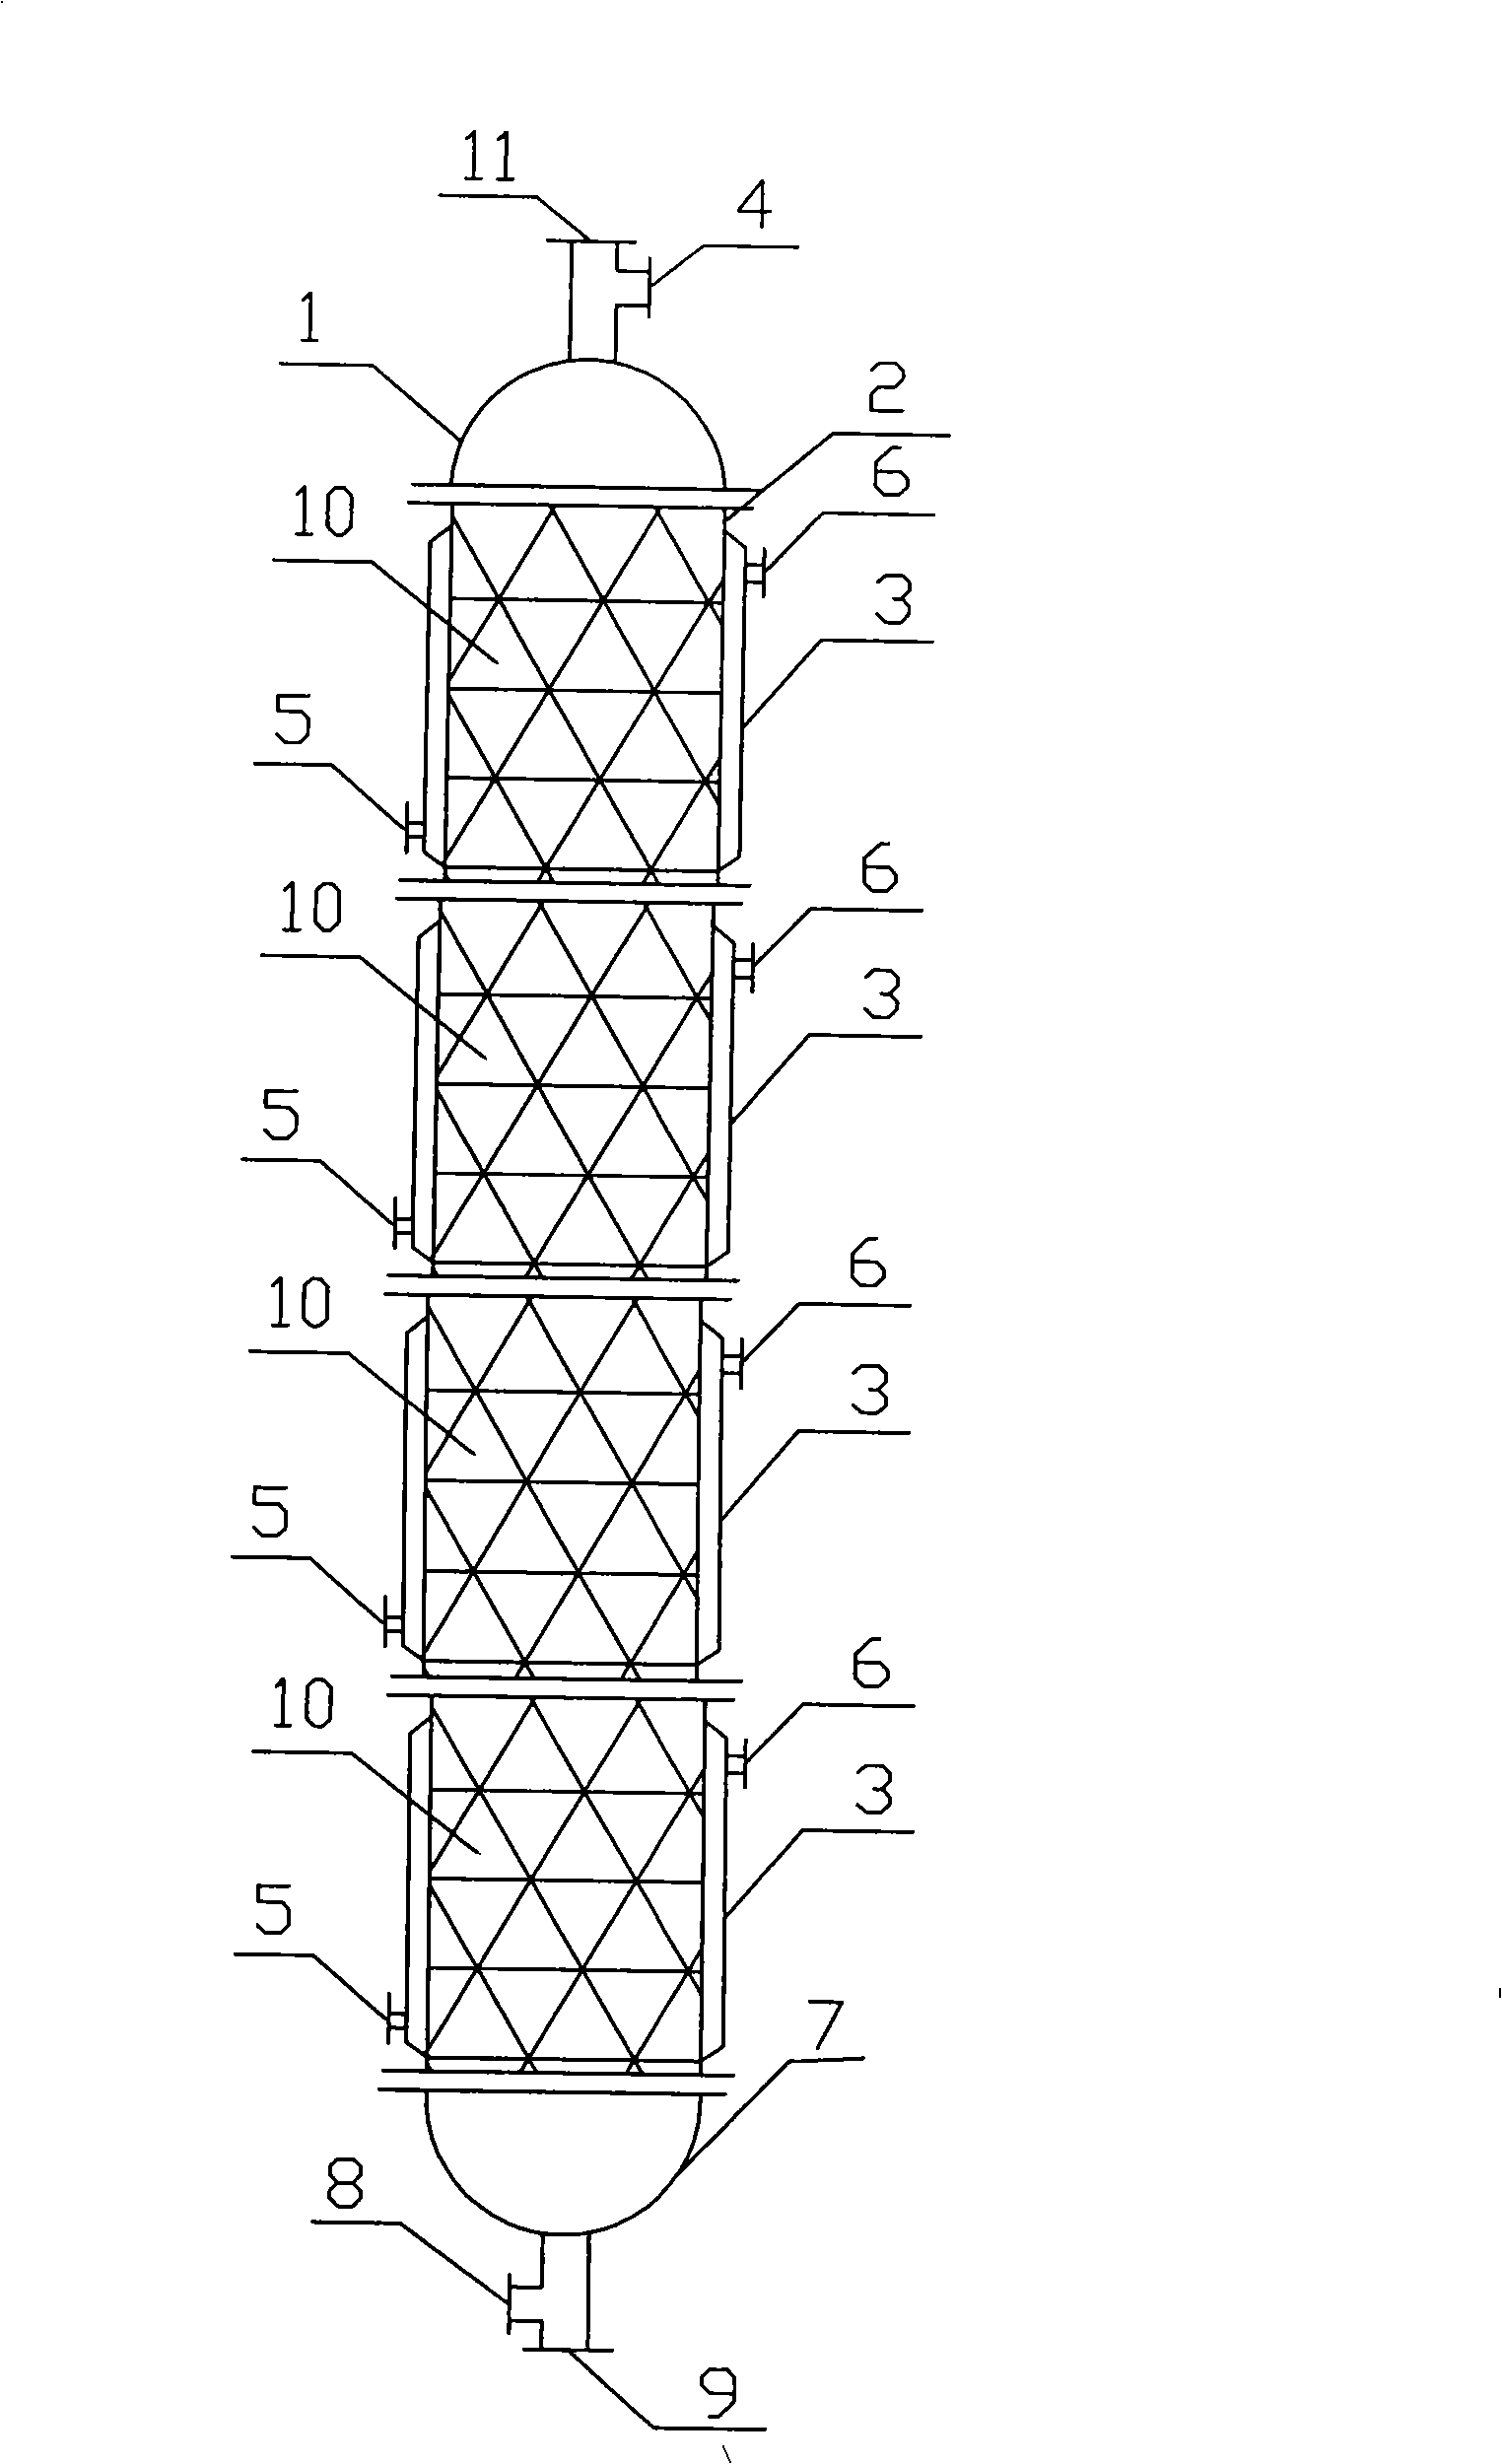 Process for preparing bromoundecanoic acid by tower type addition of undecylenic acid